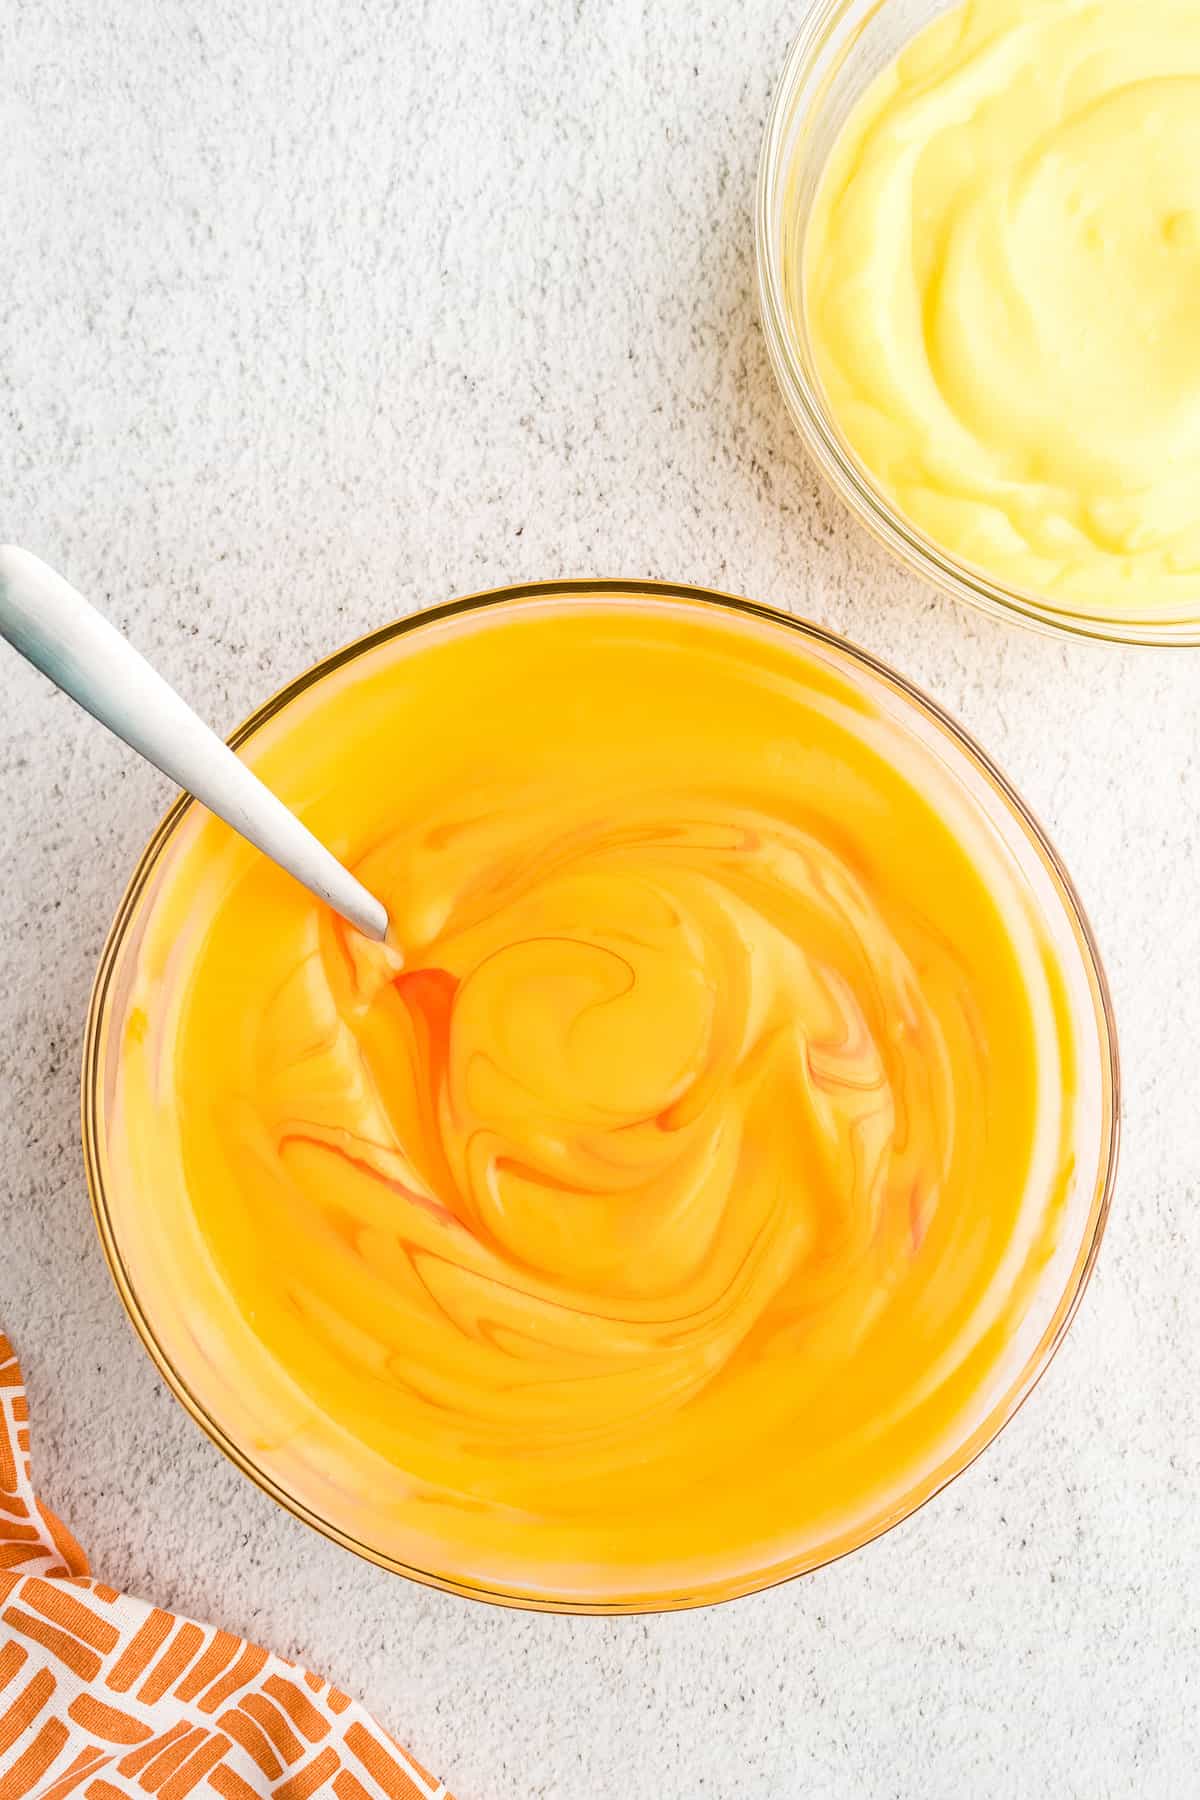 In the bowl with 4 cups of pudding add 5 drops of orange food coloring and mix together.